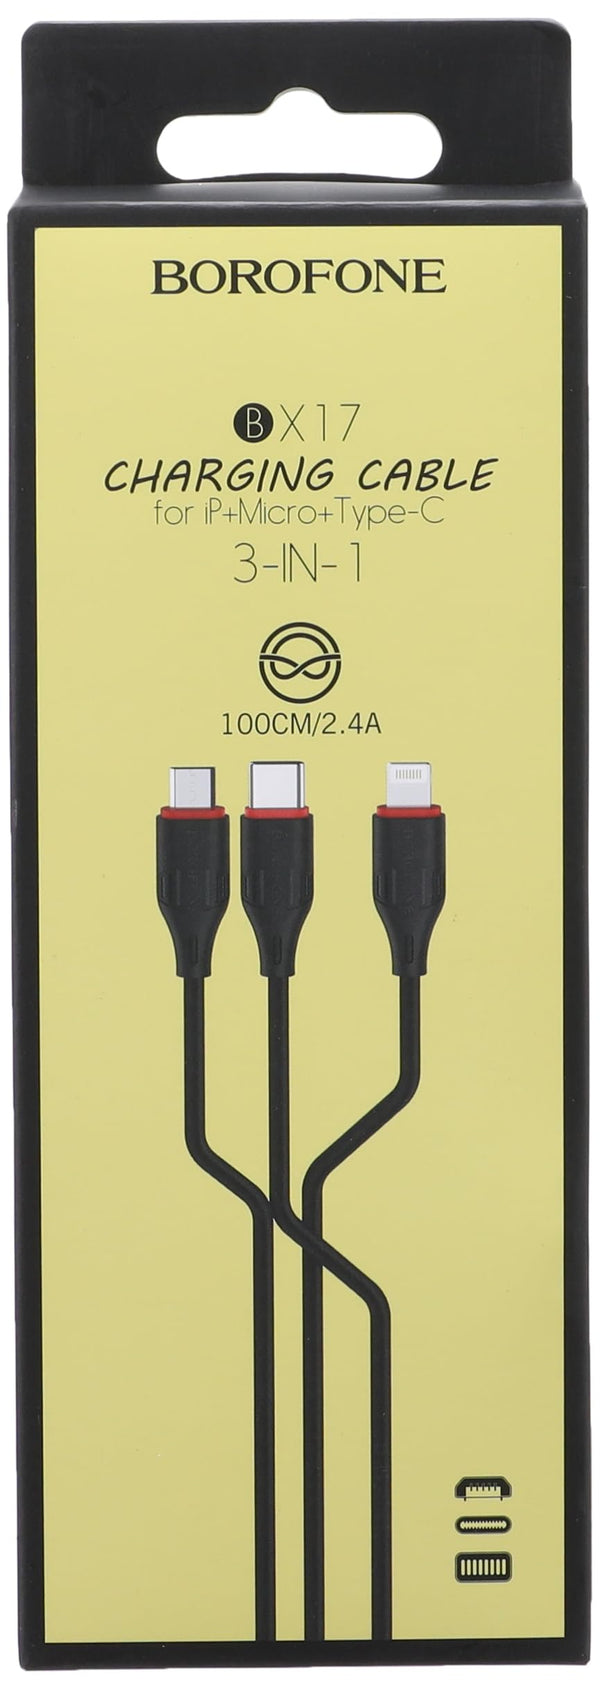 3 in 1 Charging Cable for iP+Micro+Type-C